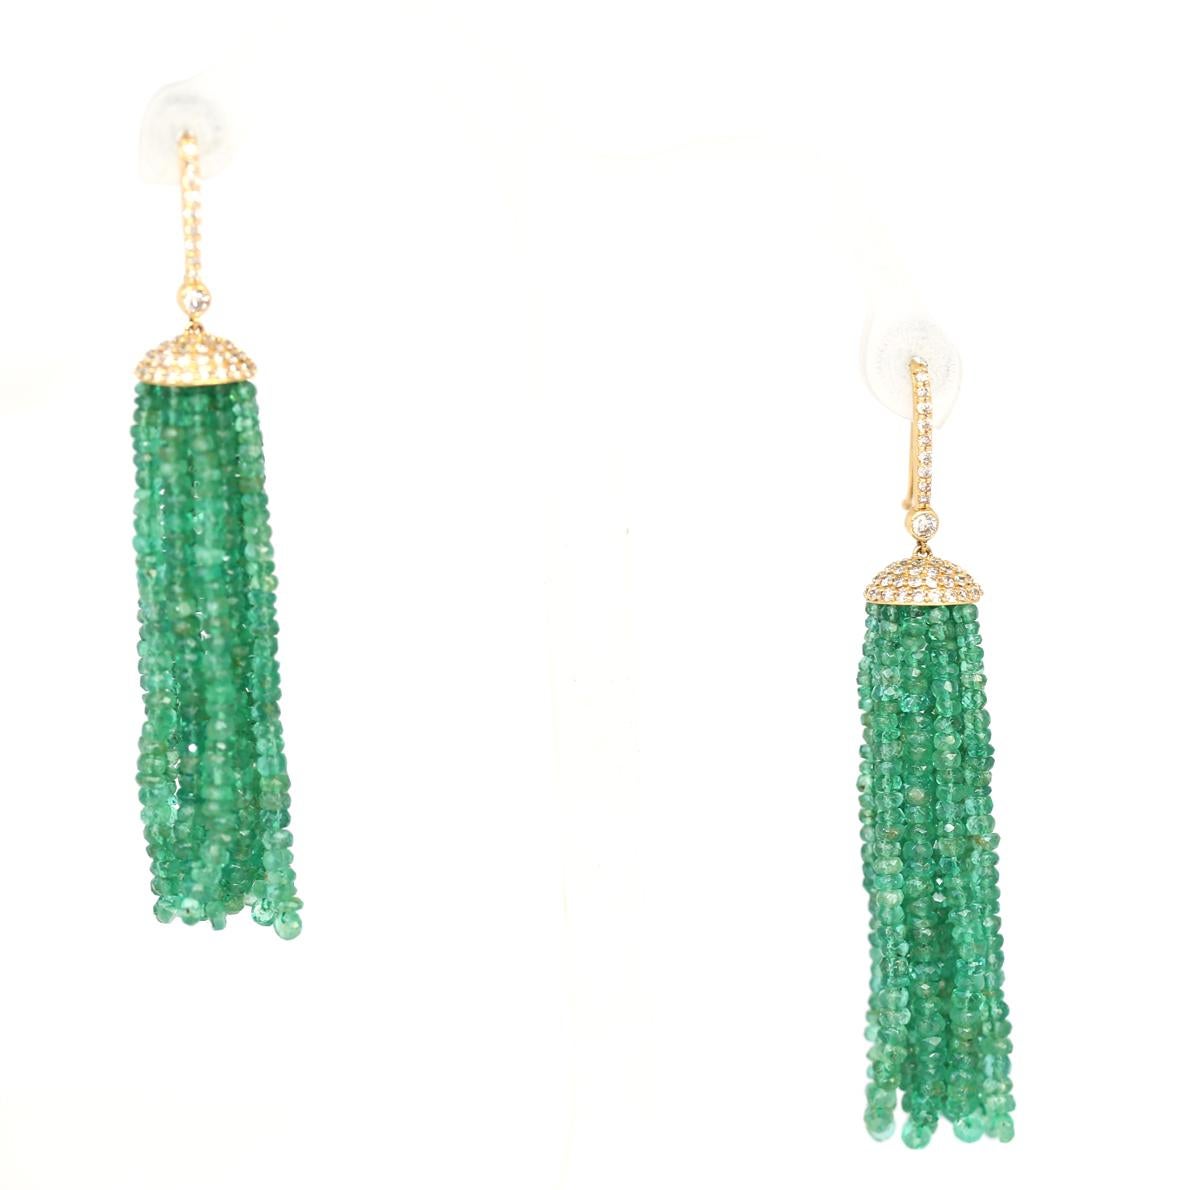 A pair of Emerald Tassels Beads and Diamond Earrings Yellow Gold 14 Karat. 1970-es design and fashion. Each is designed as tassels of Emerald beads, which move freely with the motion of the head.
Measuring approximately 2.35 - 2.90 mm in diameter.